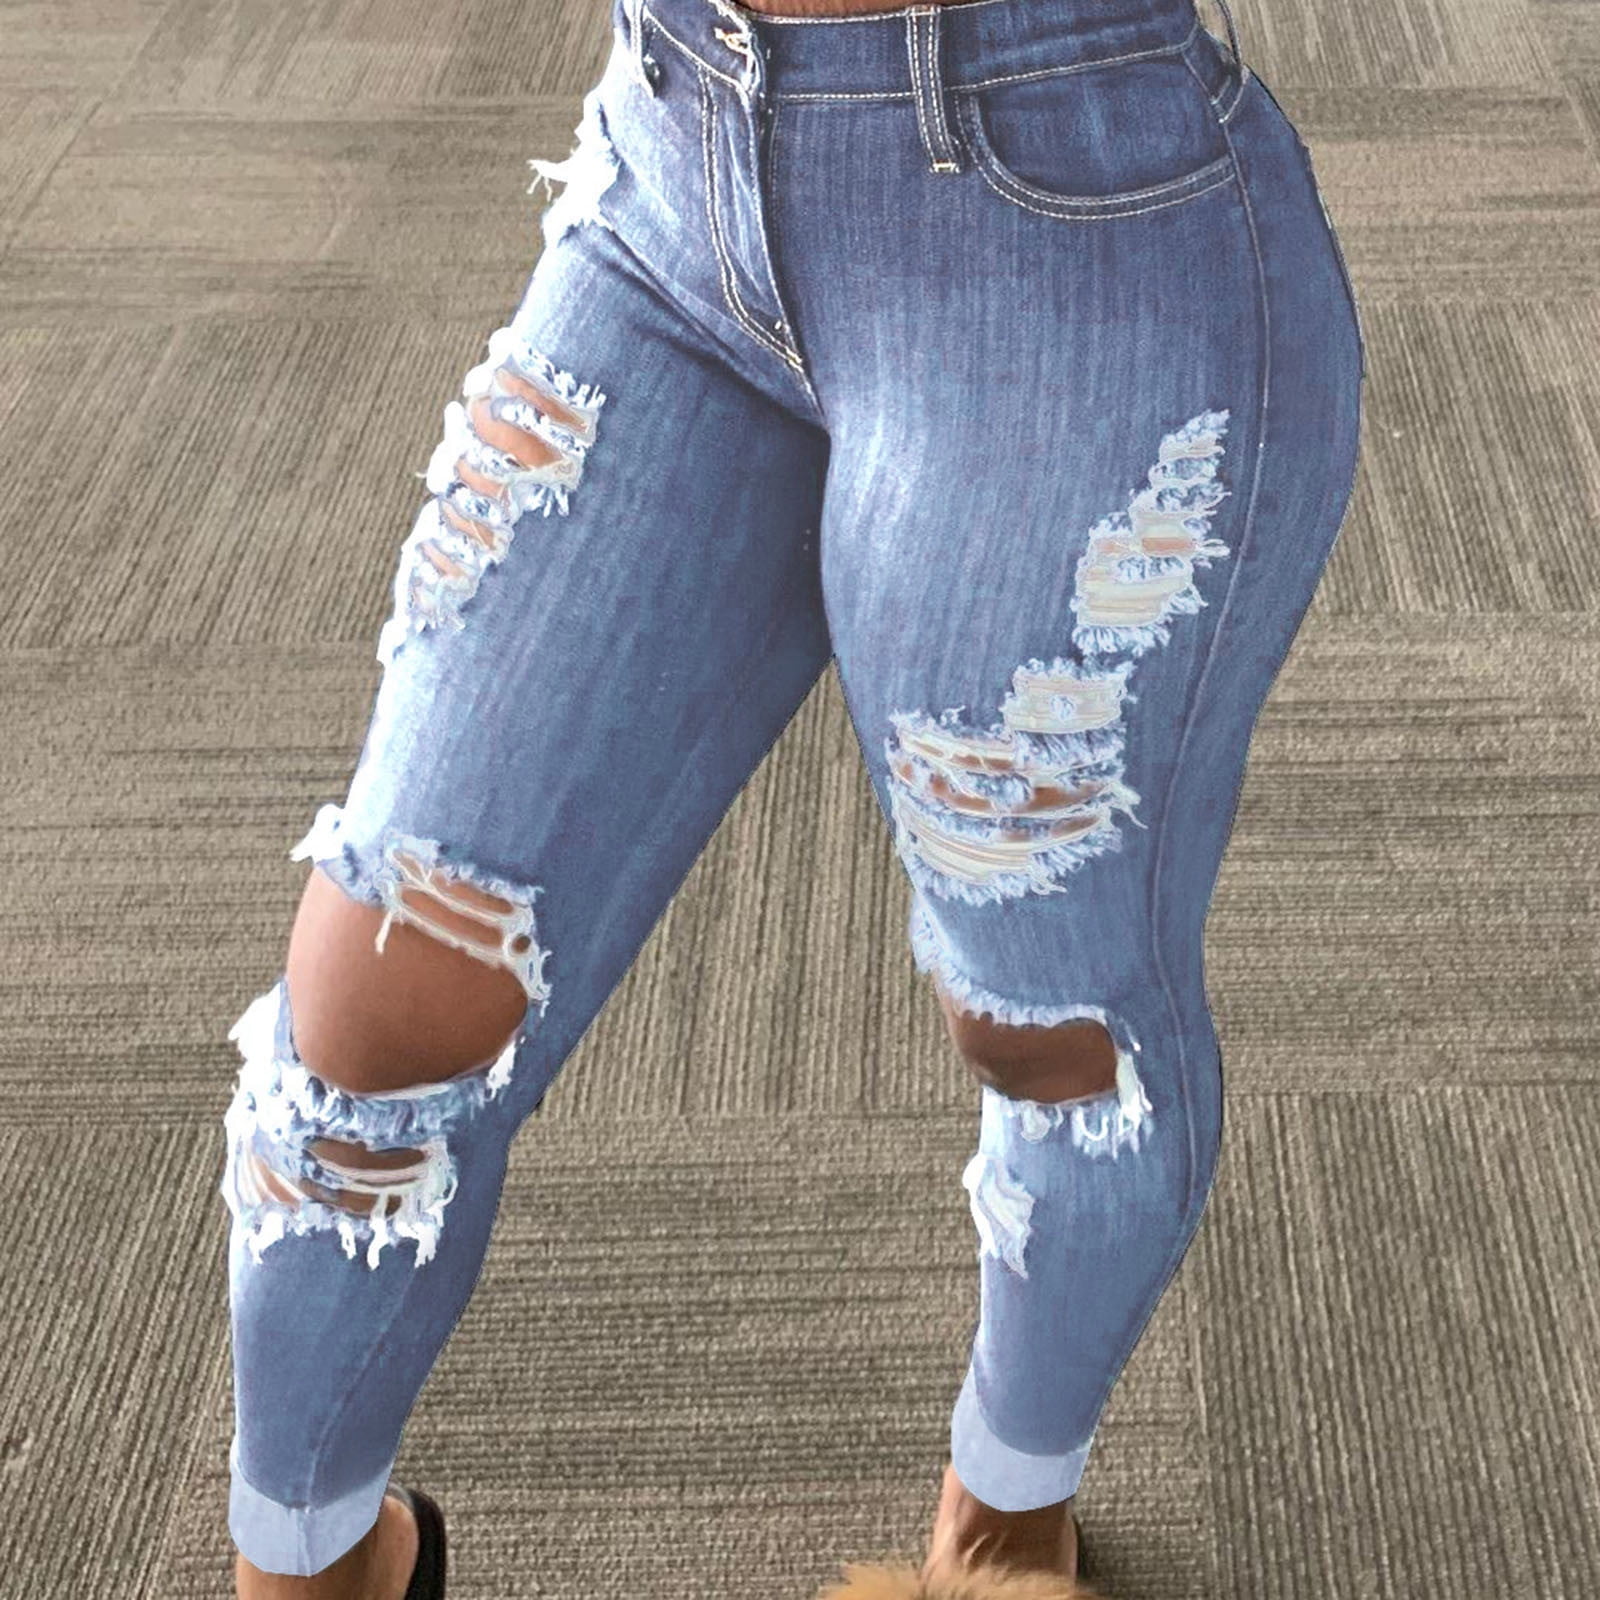 Fashion Side Ripped Holes Jeans Women Blue High Waist Button Bodycon Casual  | eBay